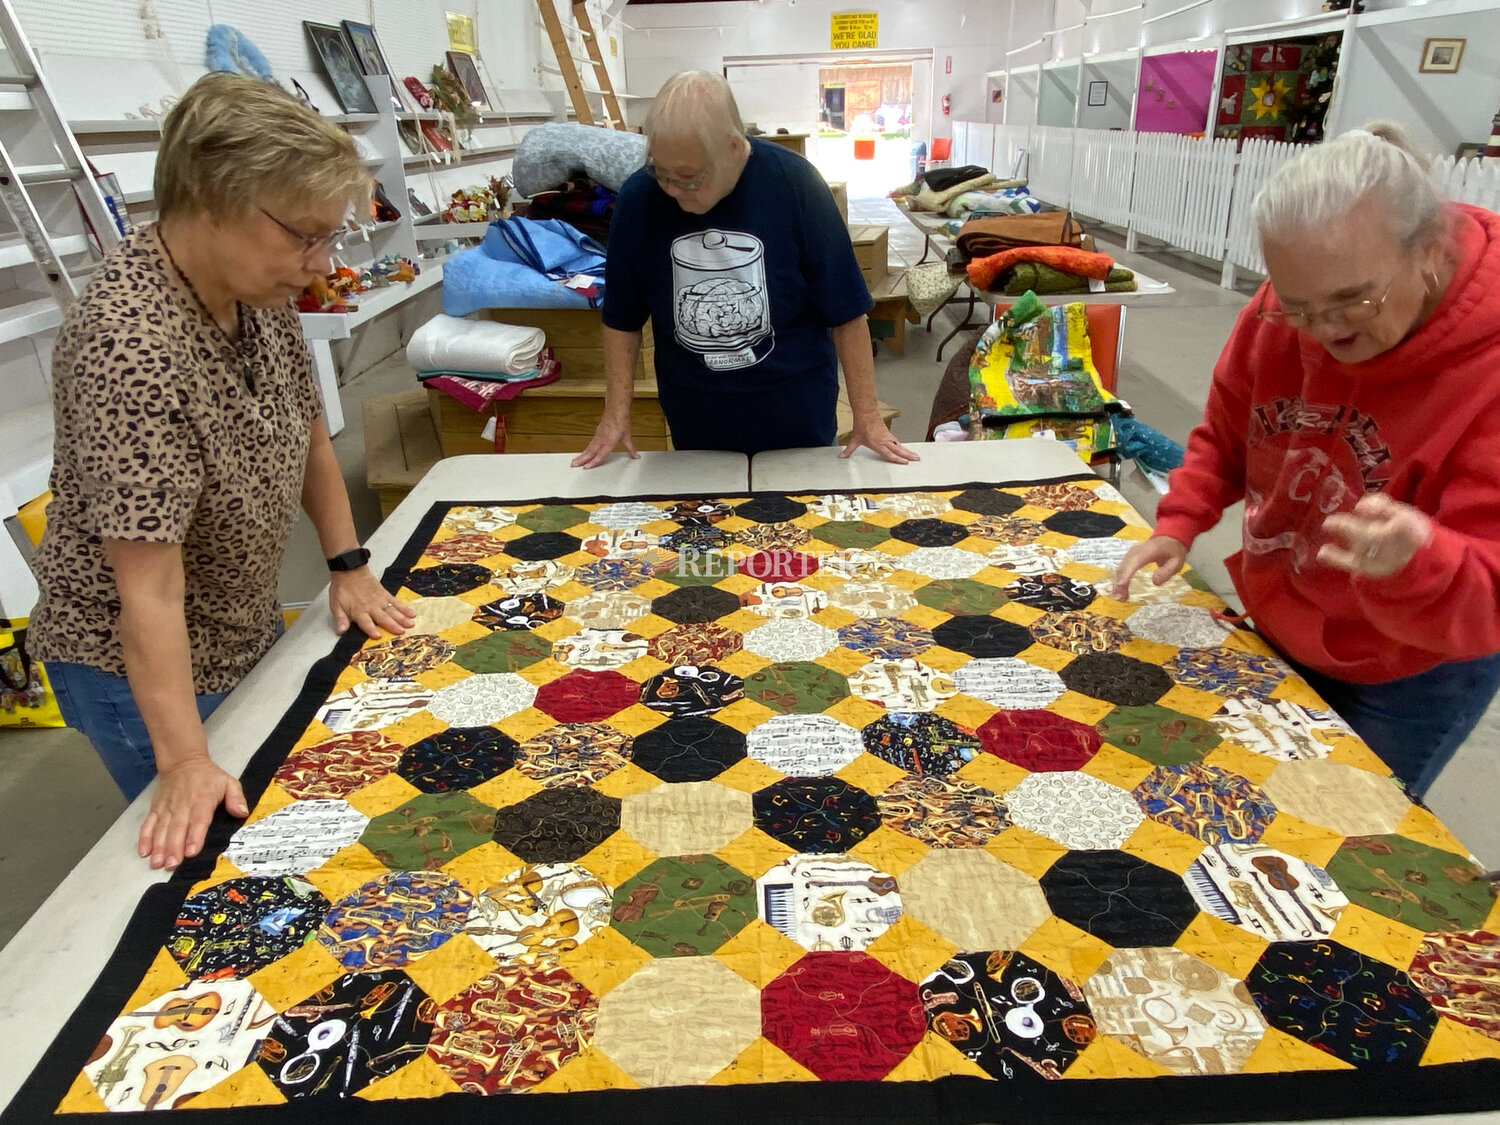 “The seams match, even on the hexagons,” one quilt show judge was overheard saying during judging in the home goods department Sunday, Aug. 13. “This is a really good use of a quilting pattern.” The quilt category was “machine pieced quilt.”